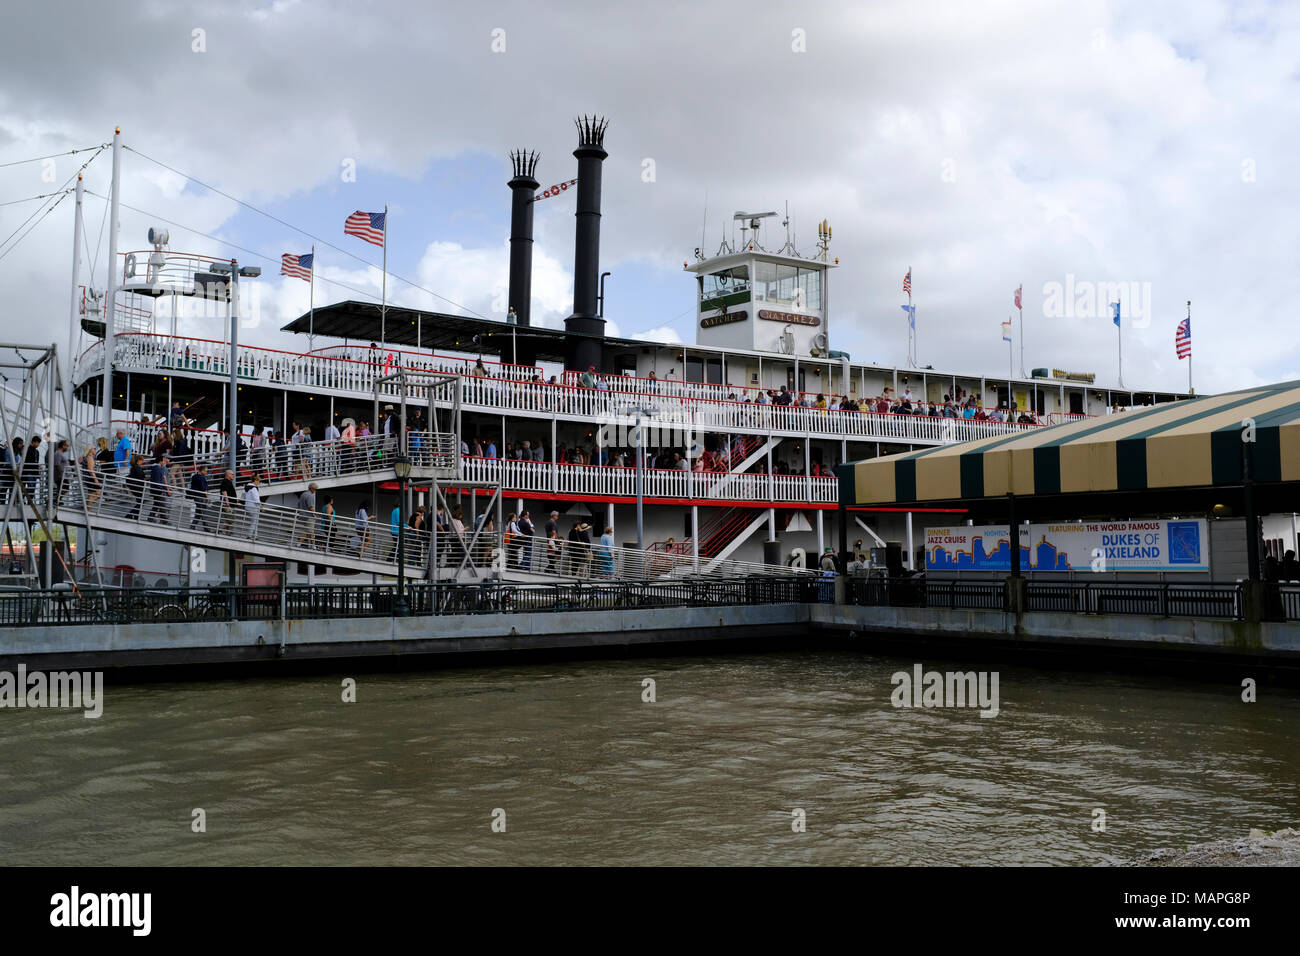 The Natchez, Steamboat unloading passengers on the Mississippi, in New Orleans, Louisiana Stock Photo